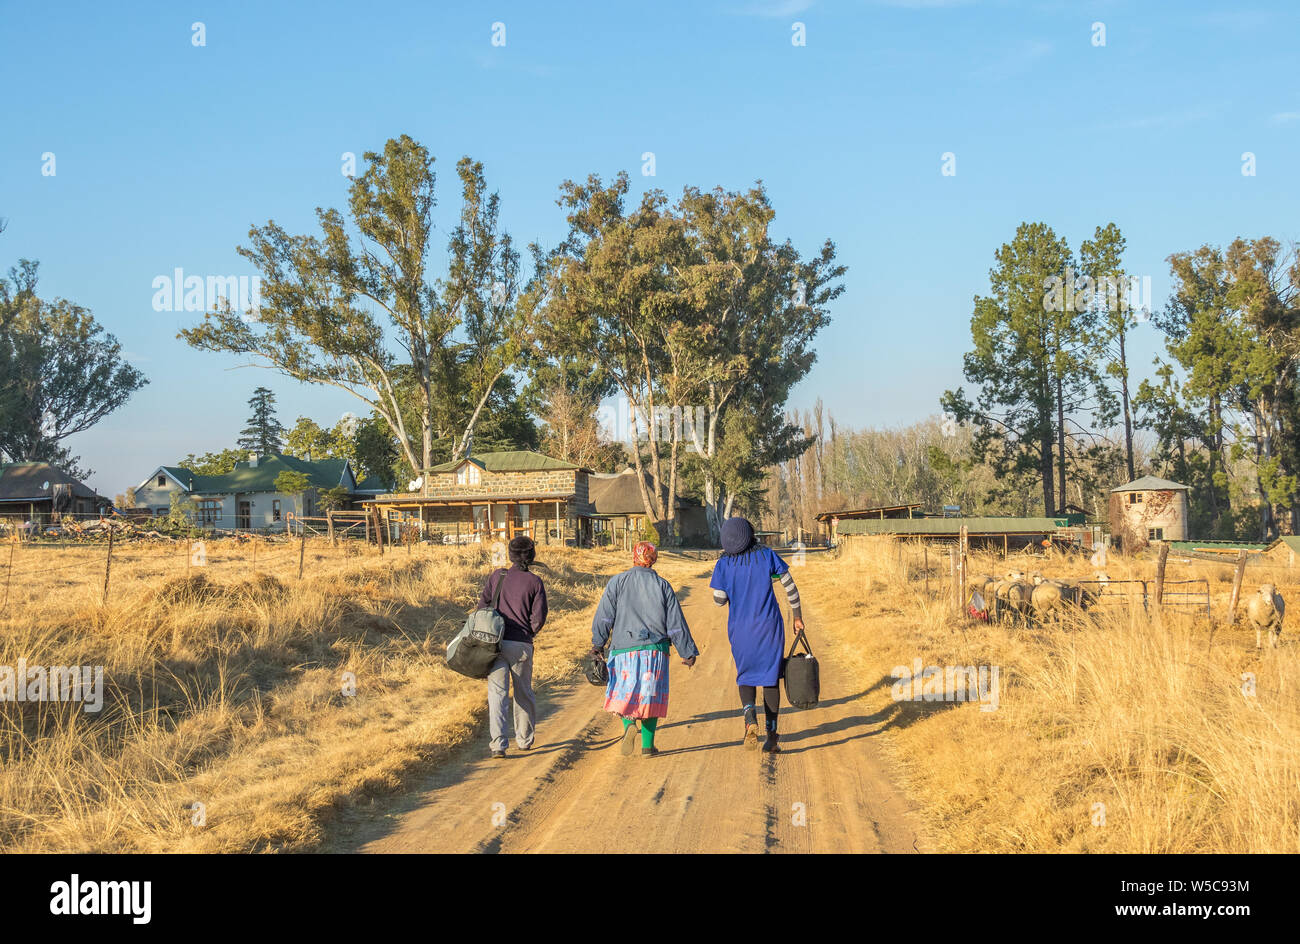 Bergville, South Africa - unidentified black women farm workers walk along a dirt road to their place of employ image in landscape format Stock Photo